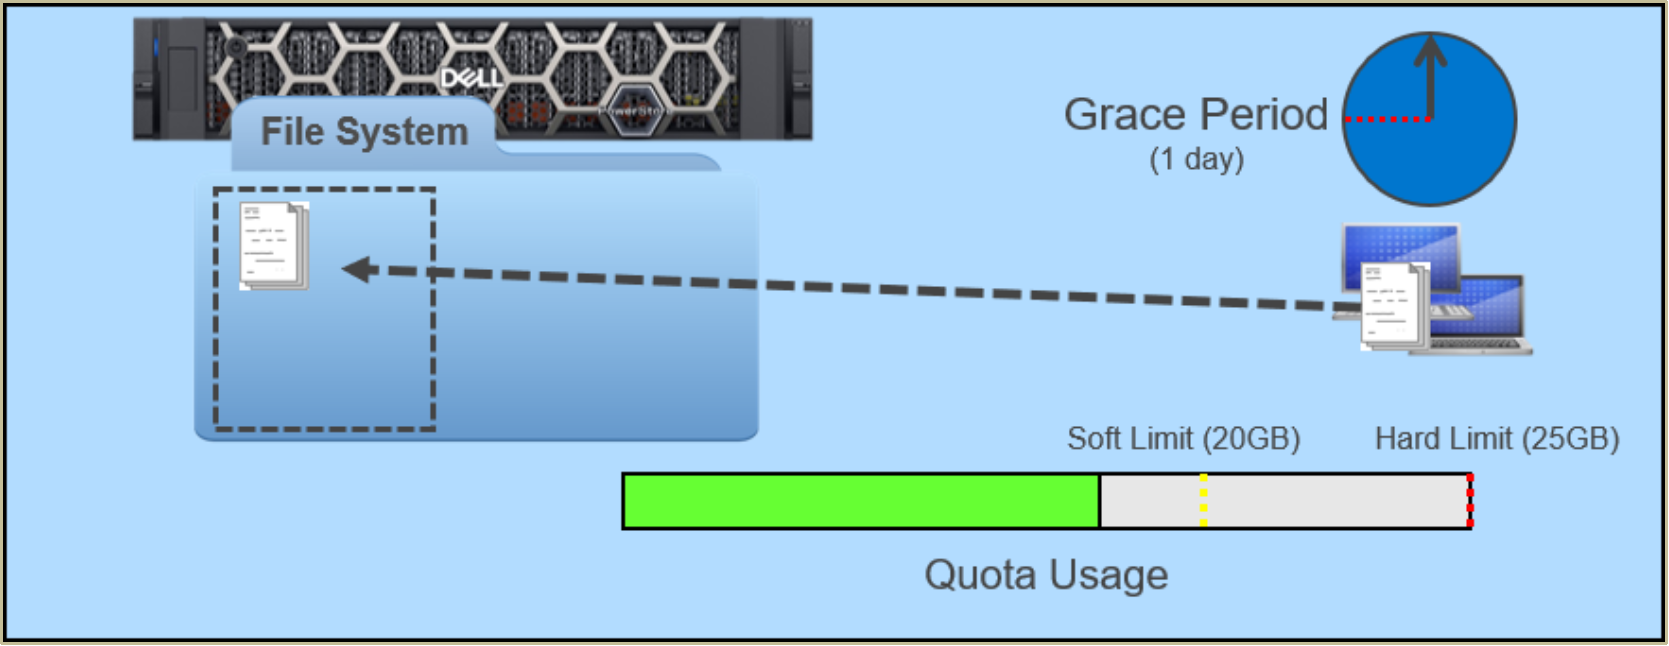 A diagram showing how a quota works under normal operation, where no limits have been exceeded.